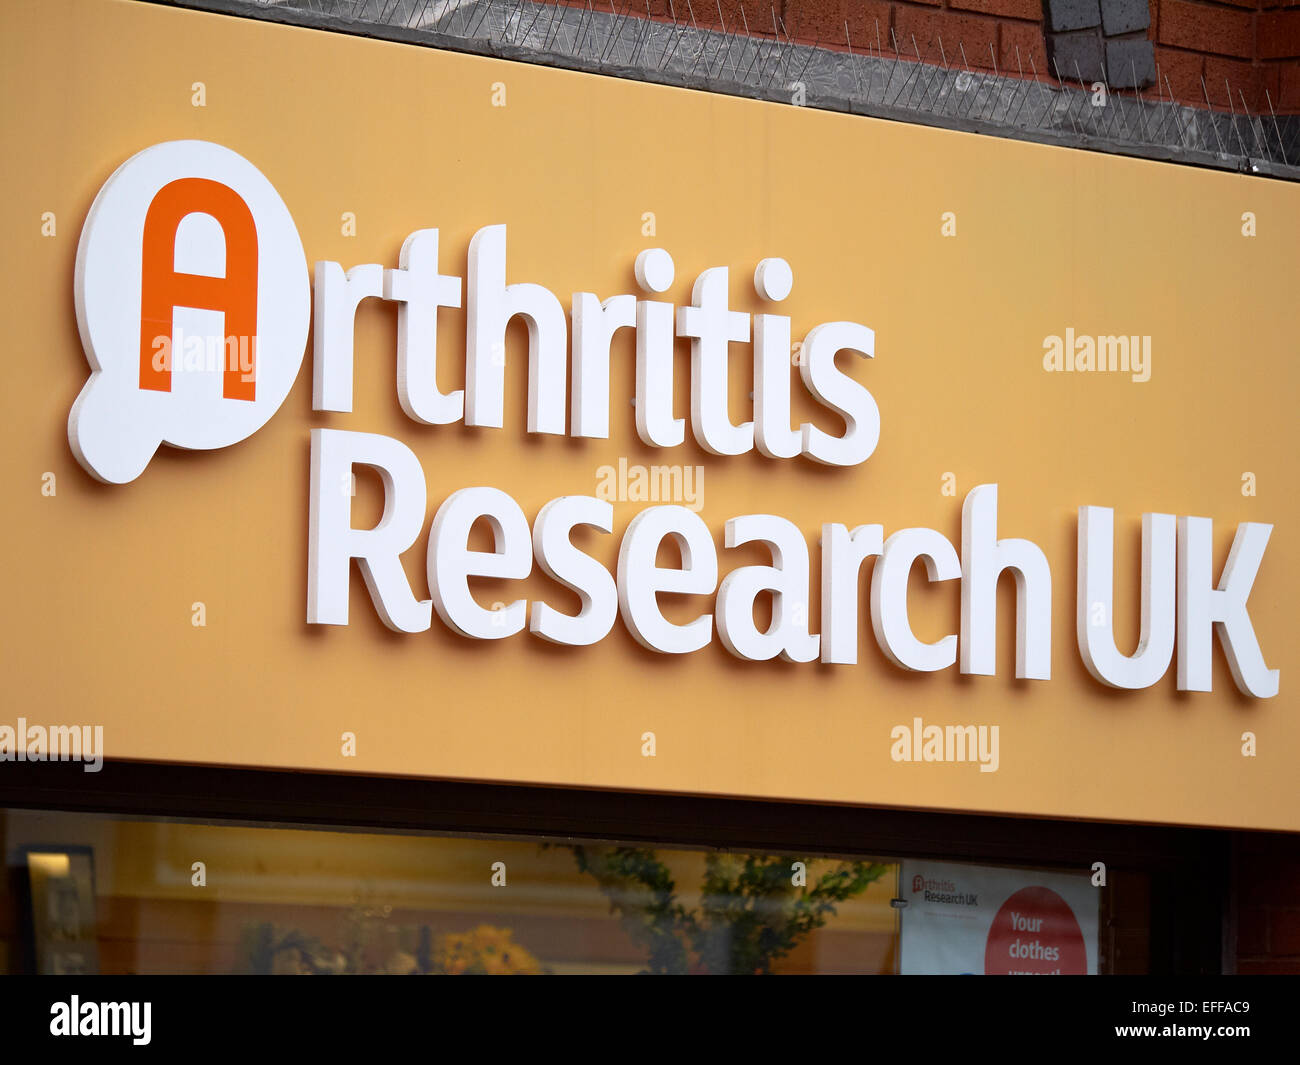 Arthritis Research UK sign on outside wall Stock Photo